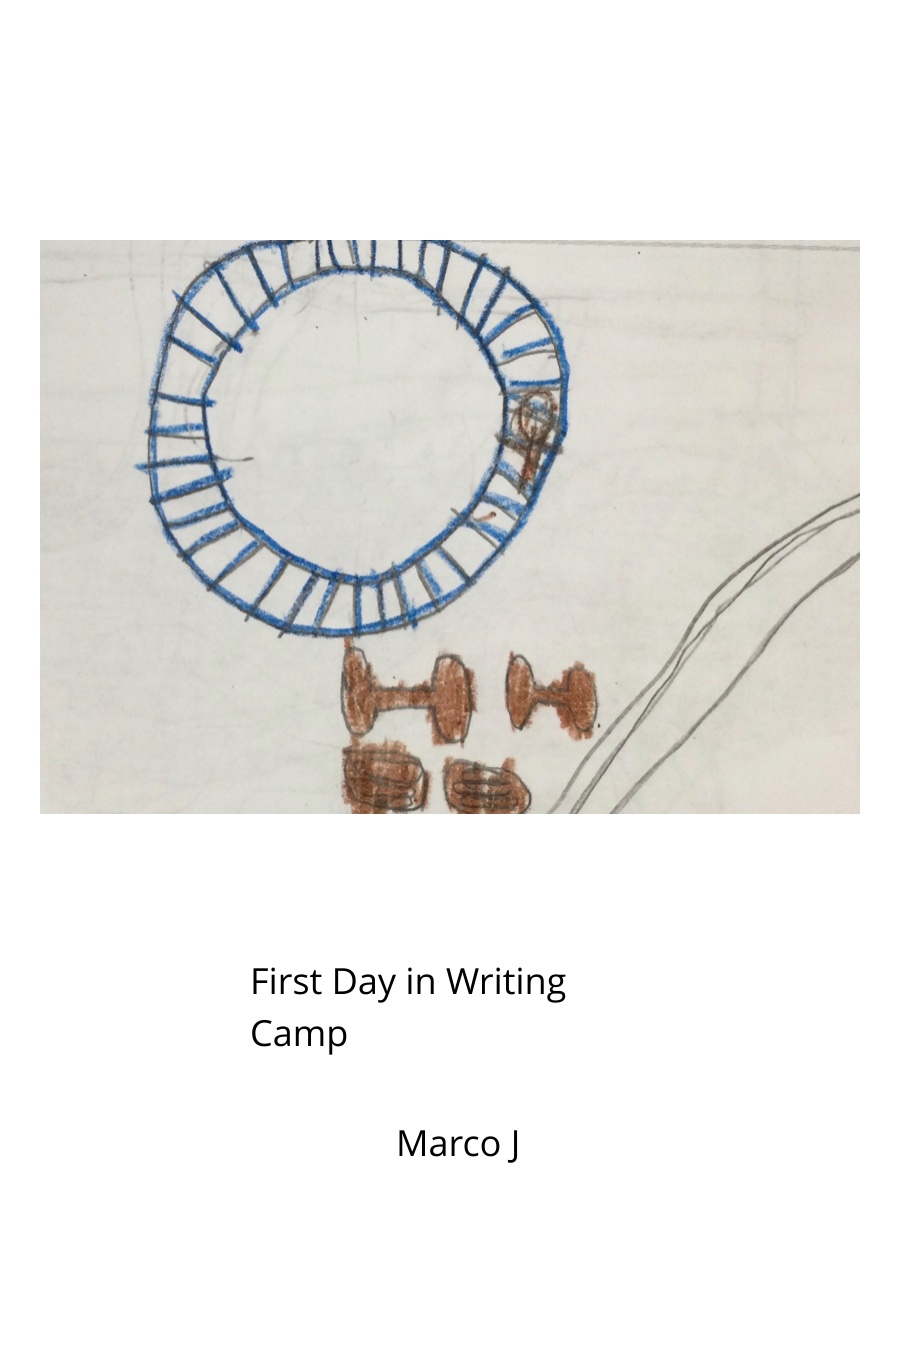 First Day in Writing Camp by Marco J